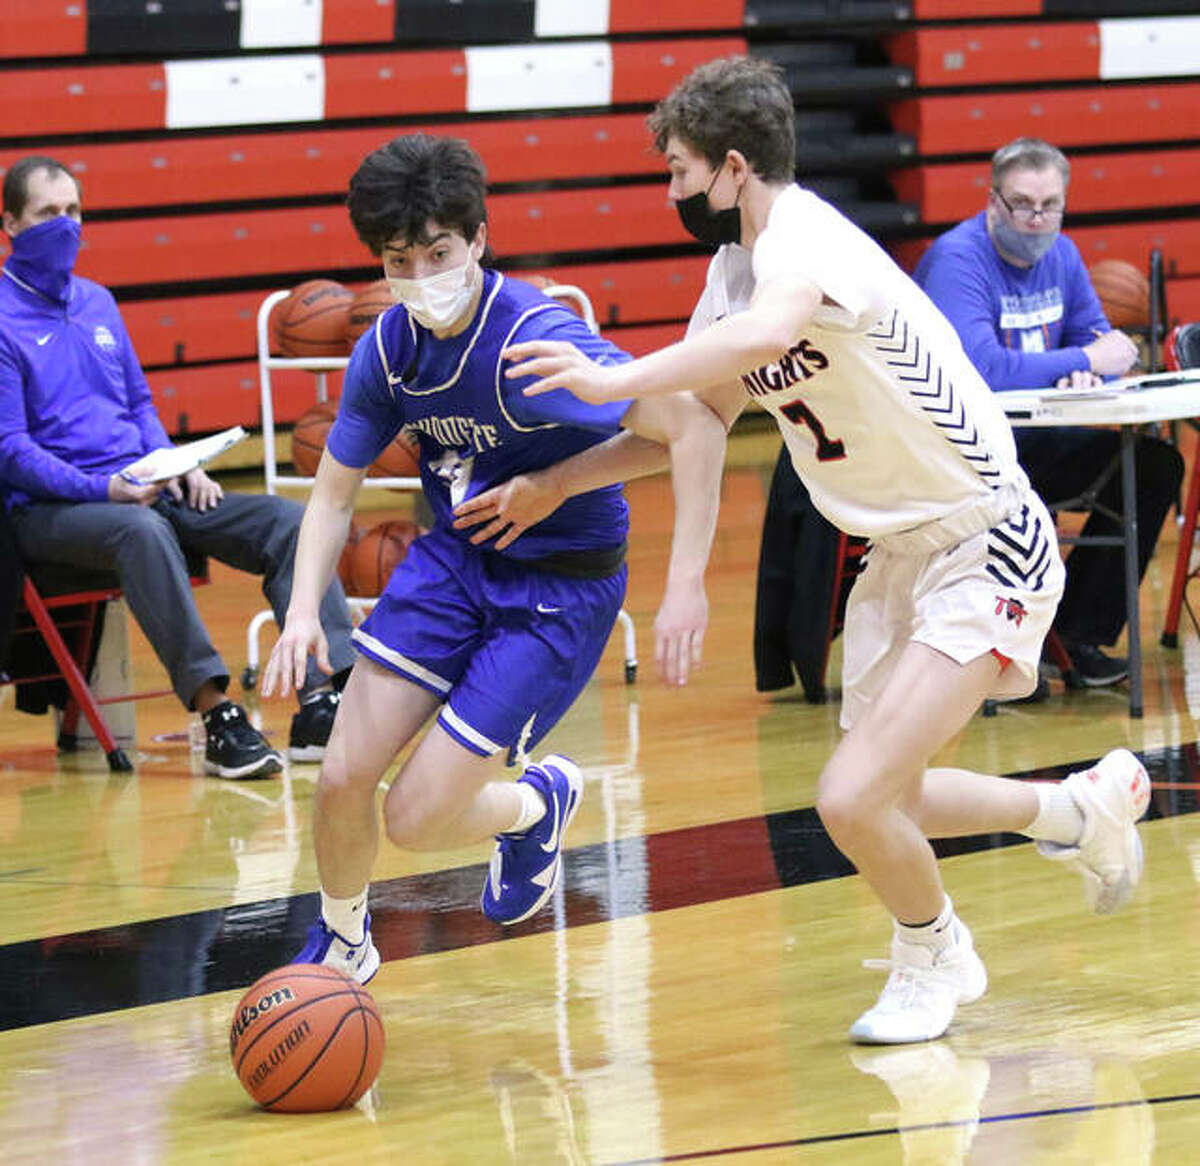 Marquette Catholic’s Owen Williams (left) drives past Triad’s Jake Stewart during a game last season in Troy. Williams is a senior and will lead an Explorers team in its first season as a member of the new Gateway Metro Conference in the 2021-22 season.